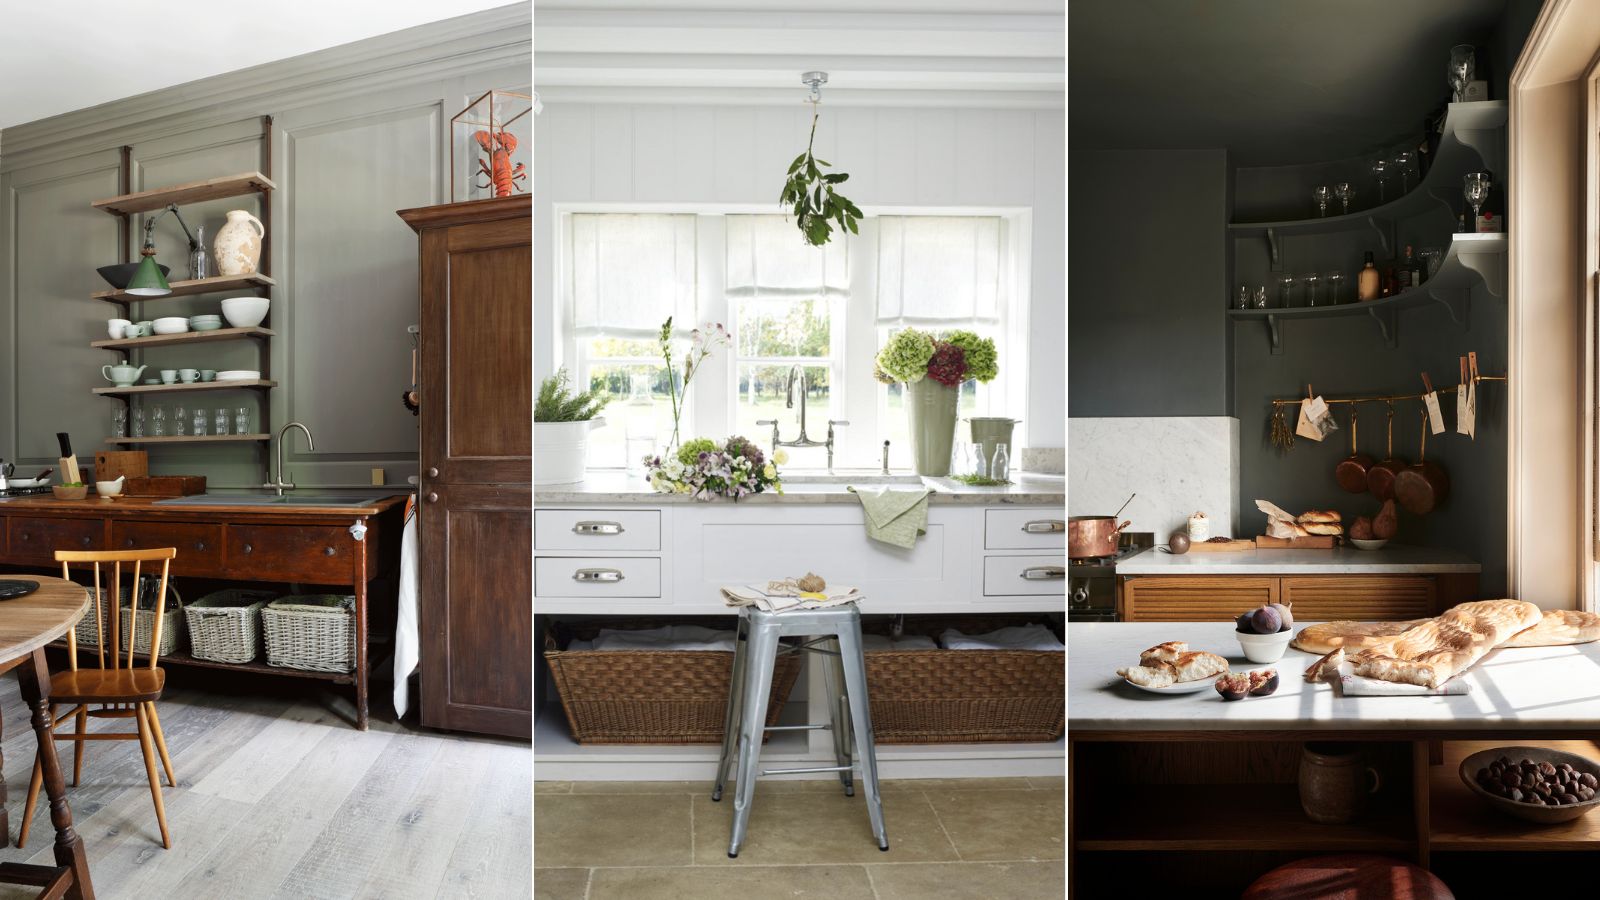 Chaos to Order: Transforming Your Kitchen with Storage Containers